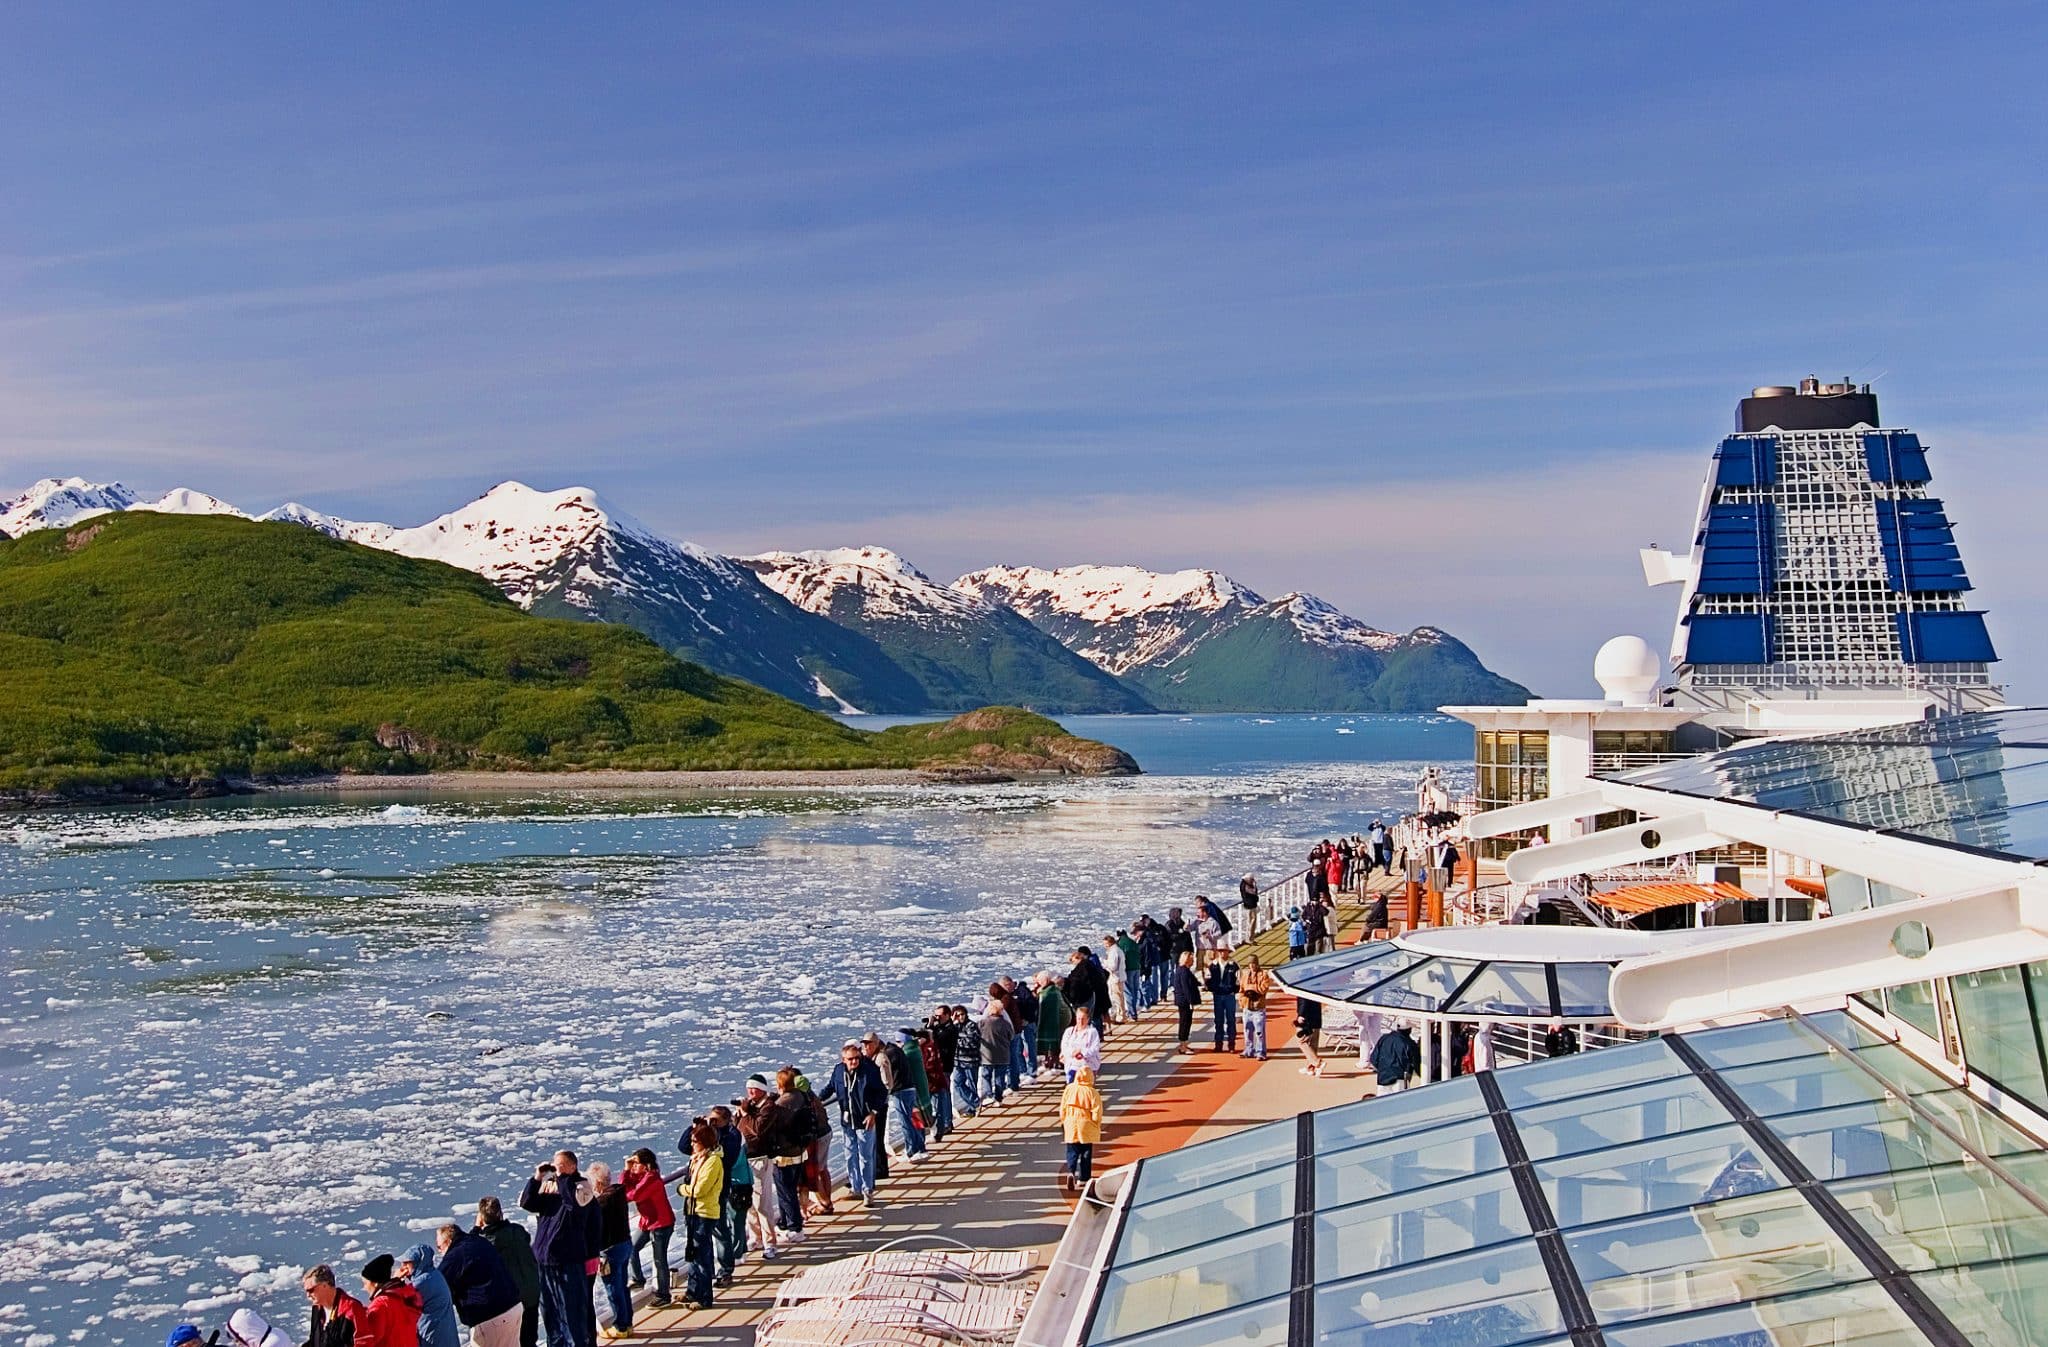 celebrity cruise ship in Alaska with people looking at the views on deck